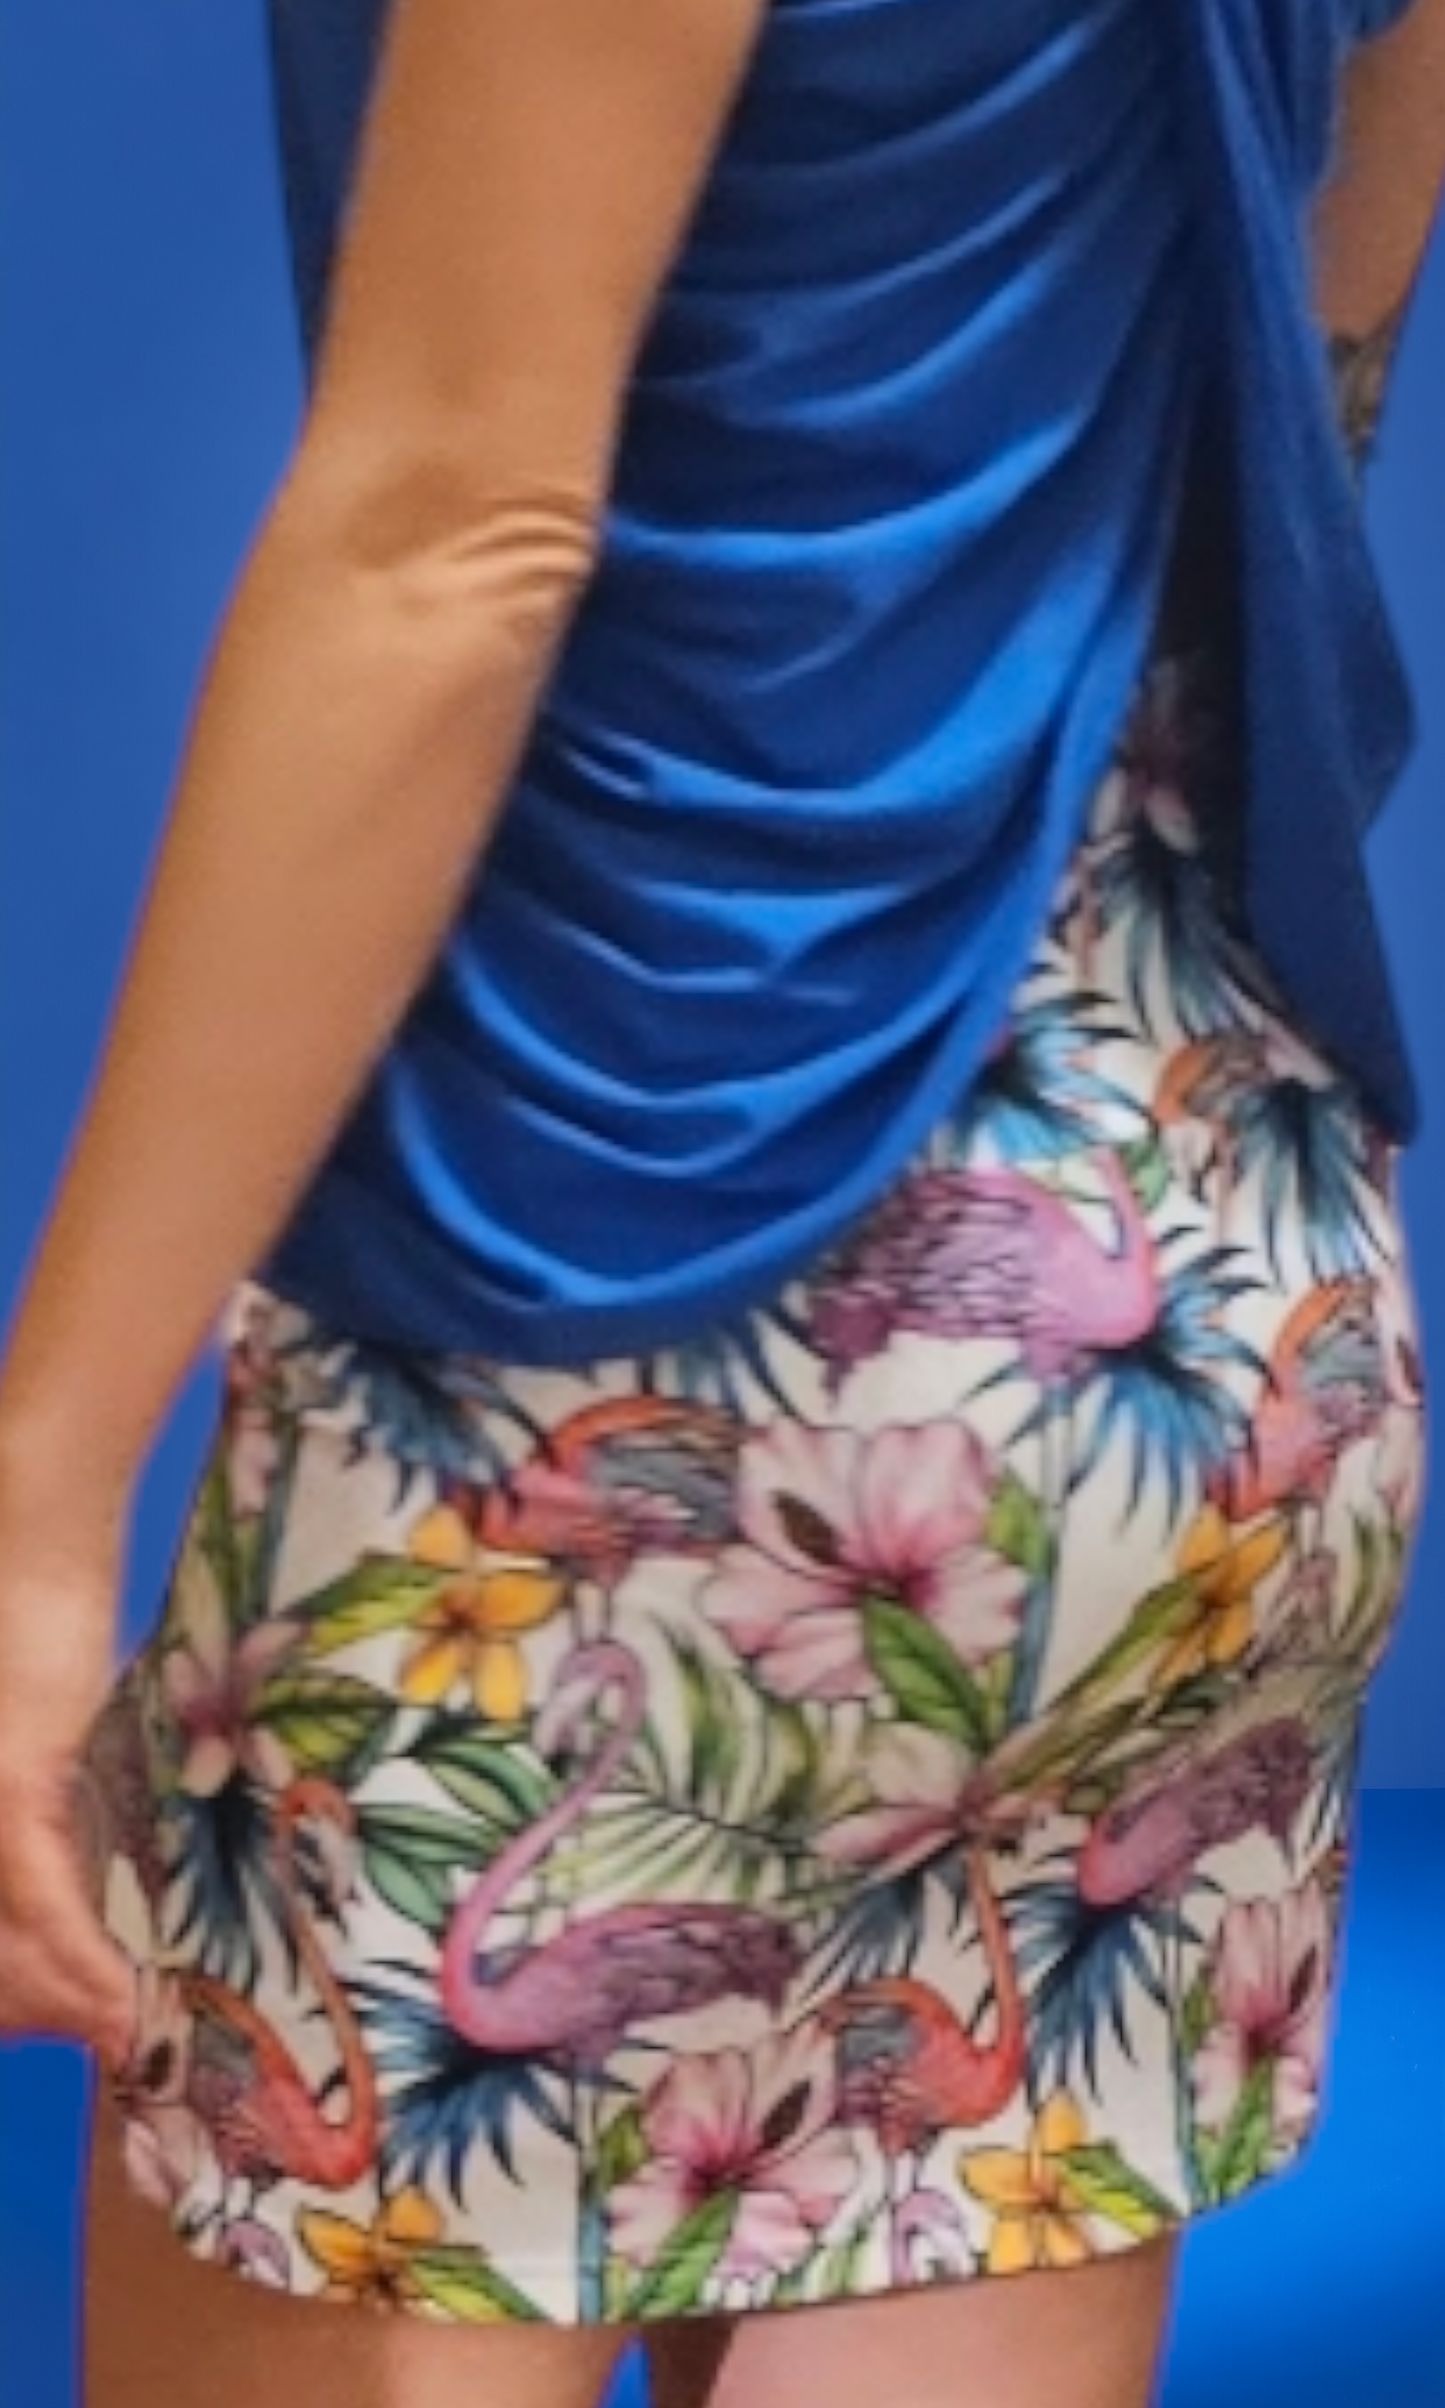 a woman wearing a blue top and a floral skirt